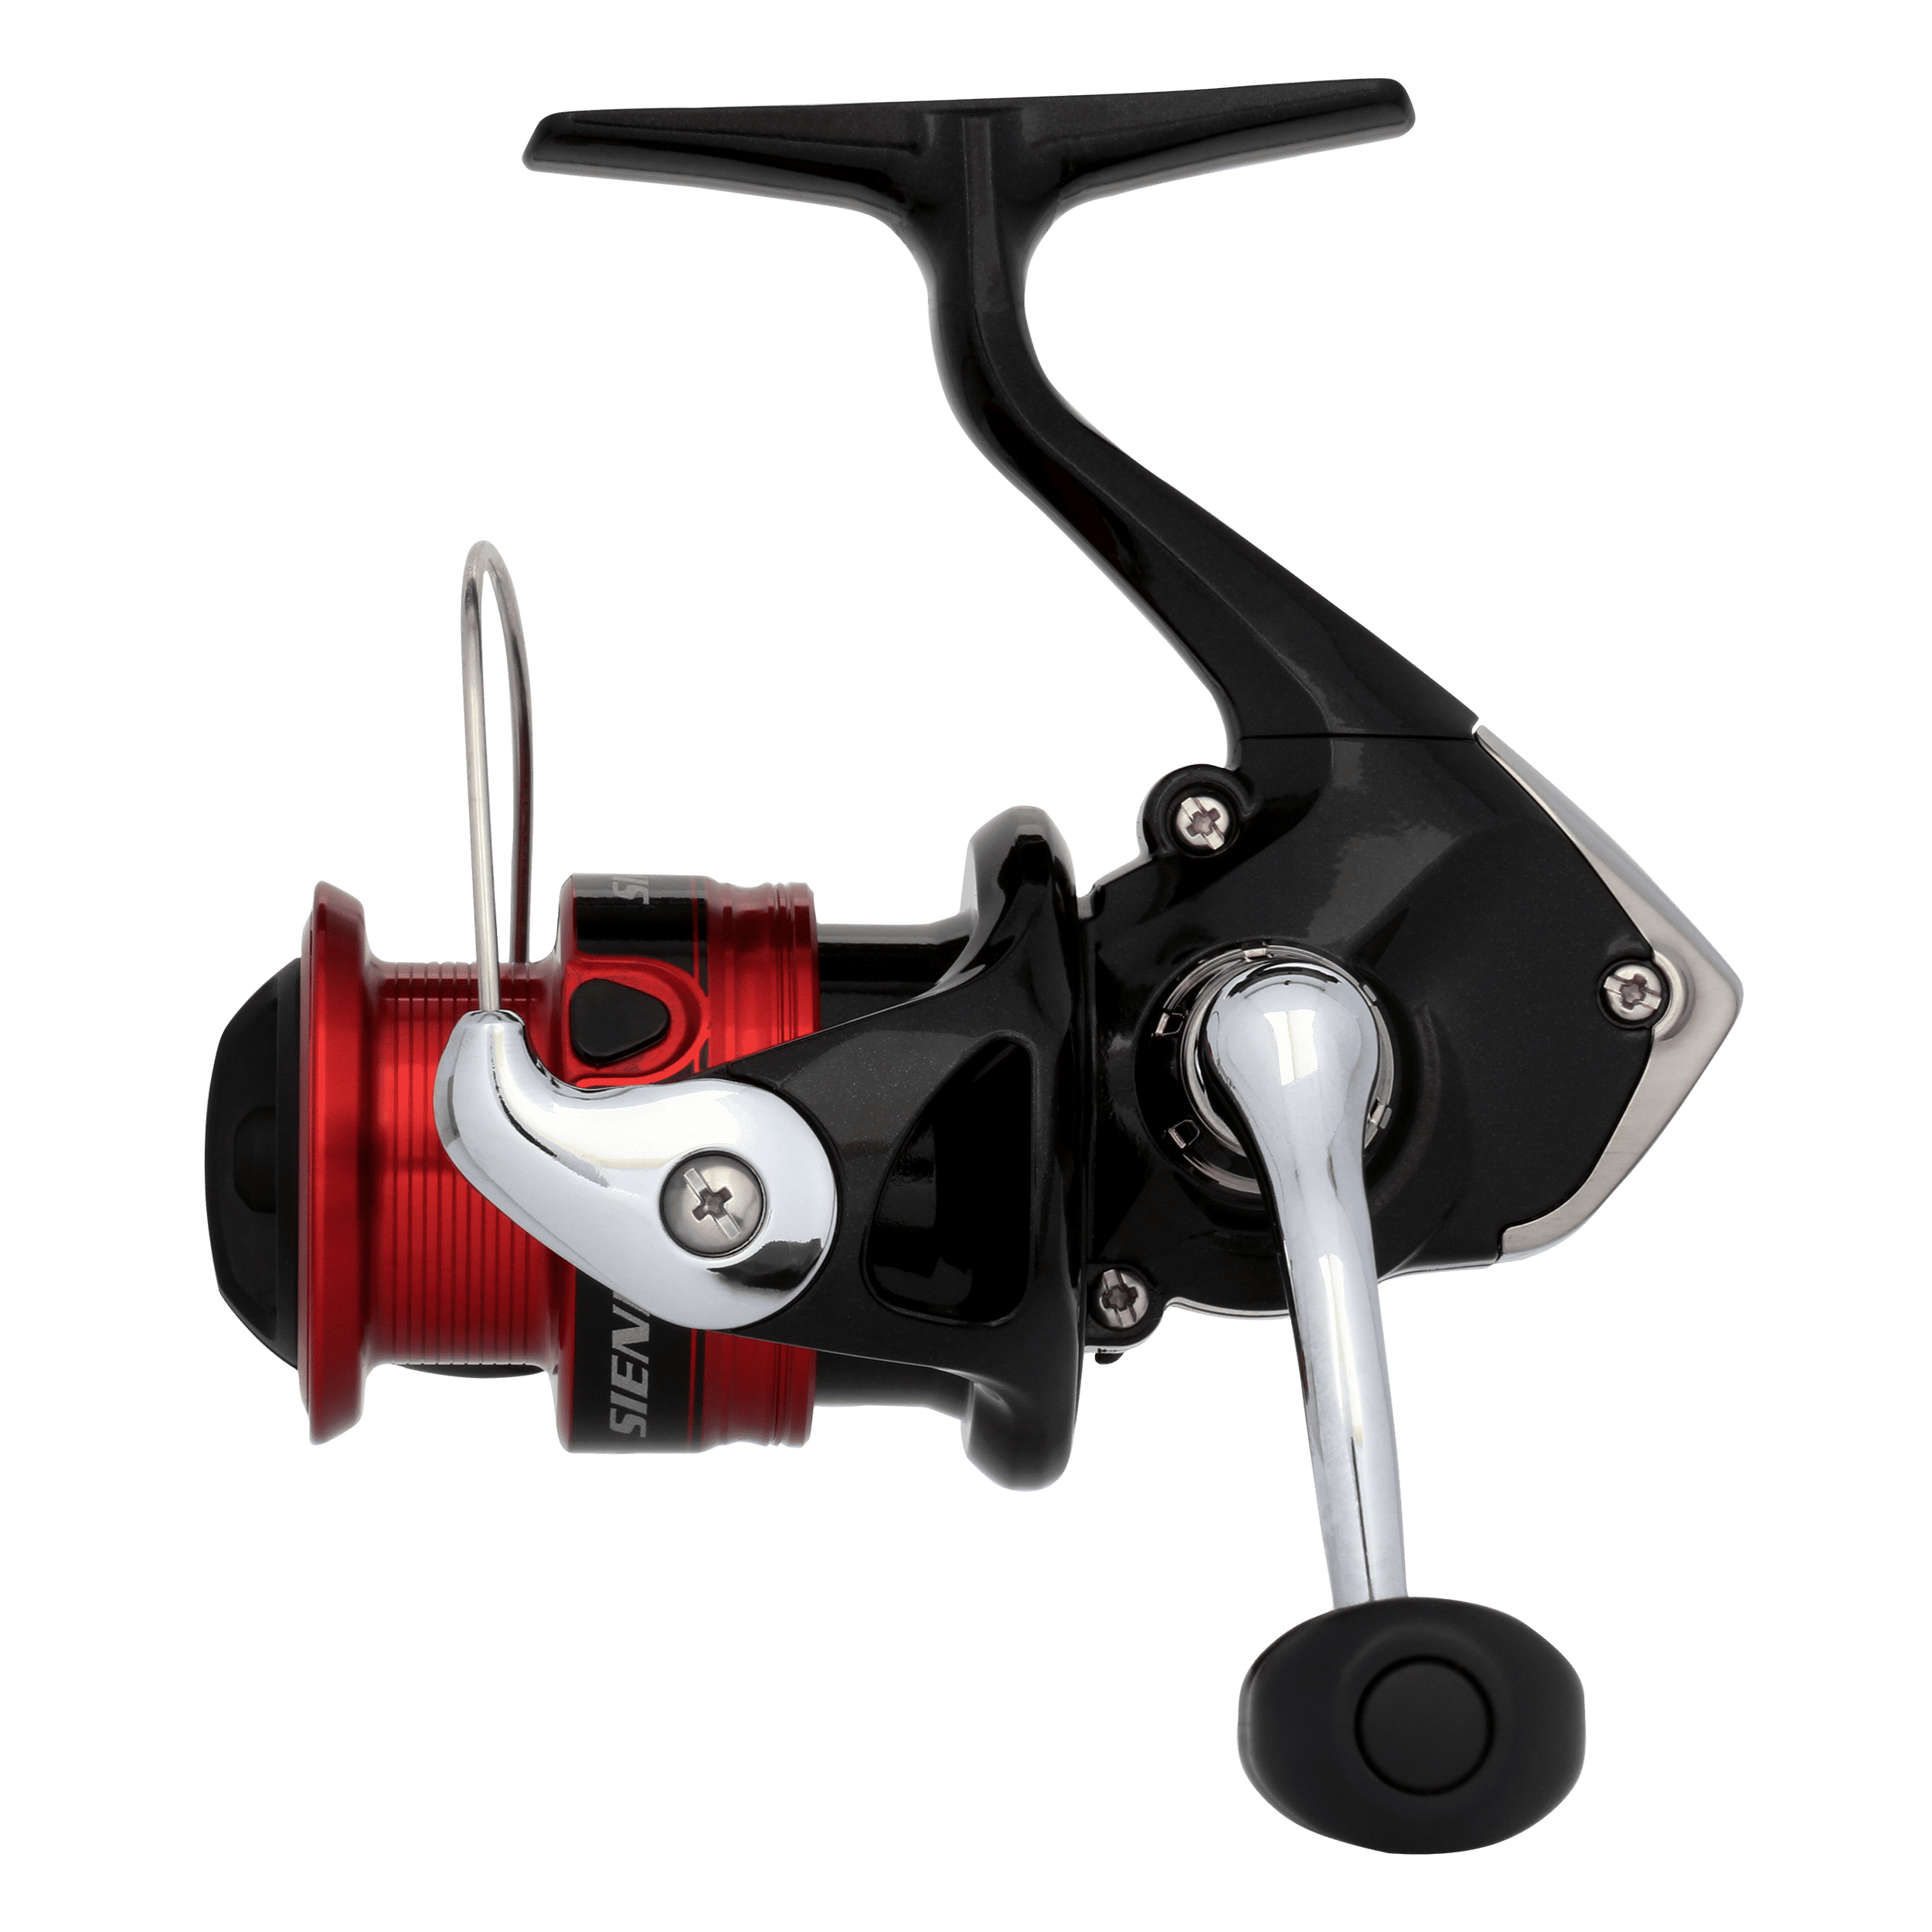 Shimano Sienna 4000 Reel Stand - Cnc Machined 42mm Spinning Reel